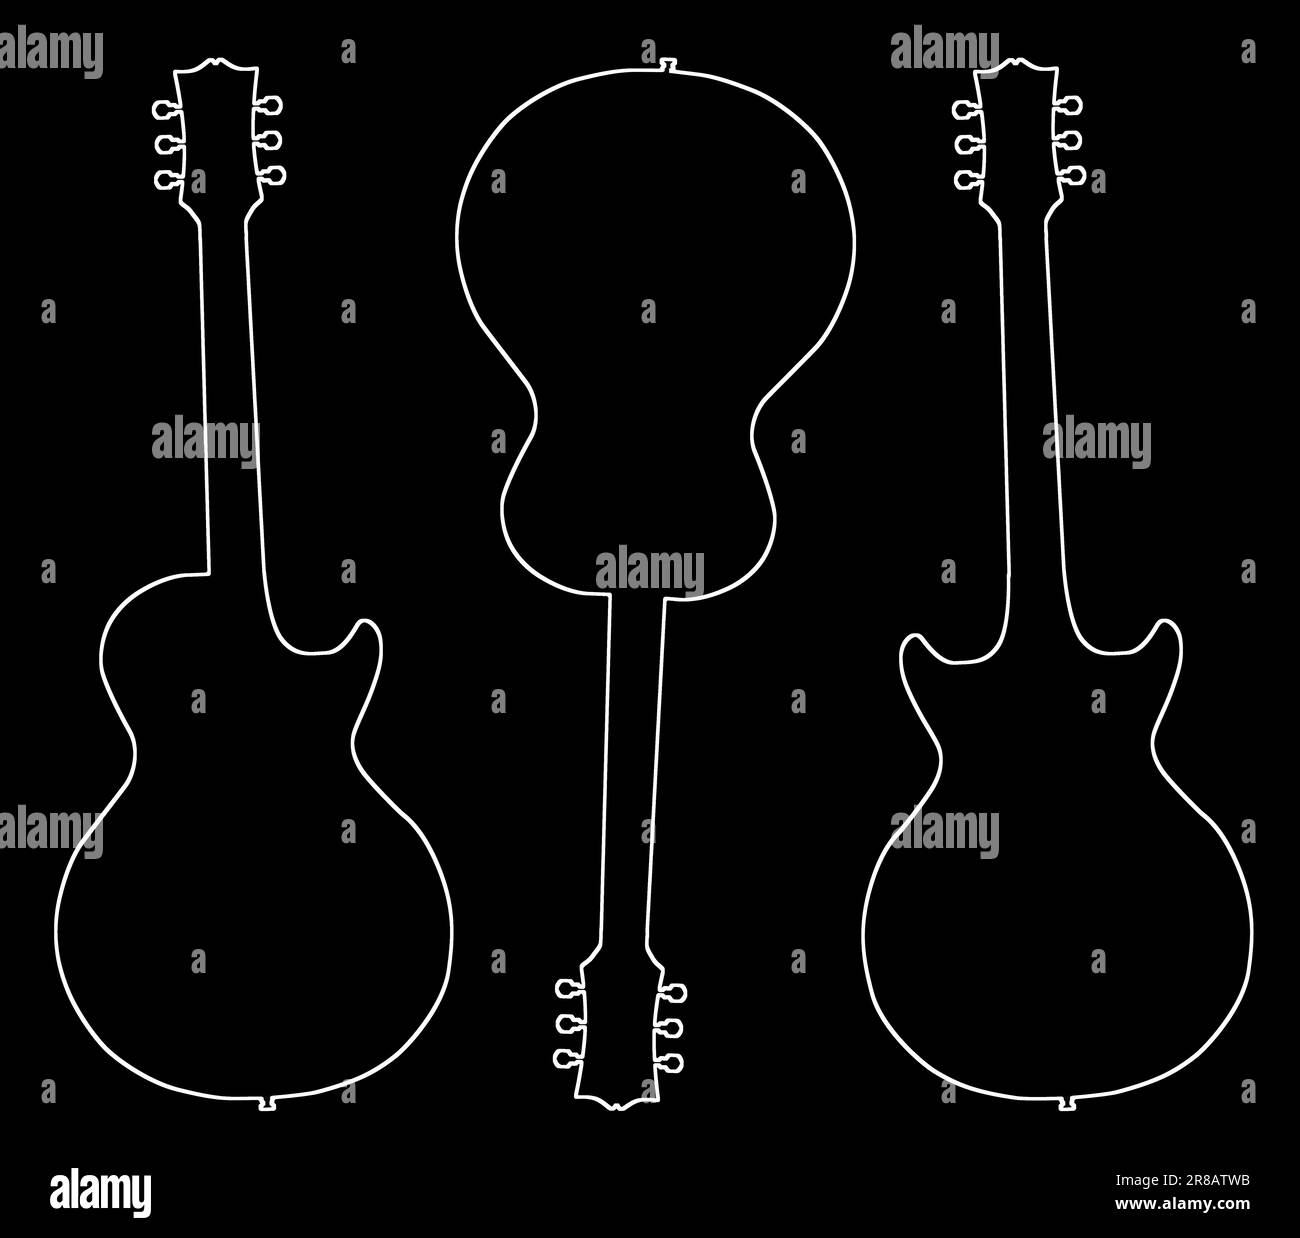 Traditional guitar shape white line outline silhouettes isolated over a black background Stock Photo